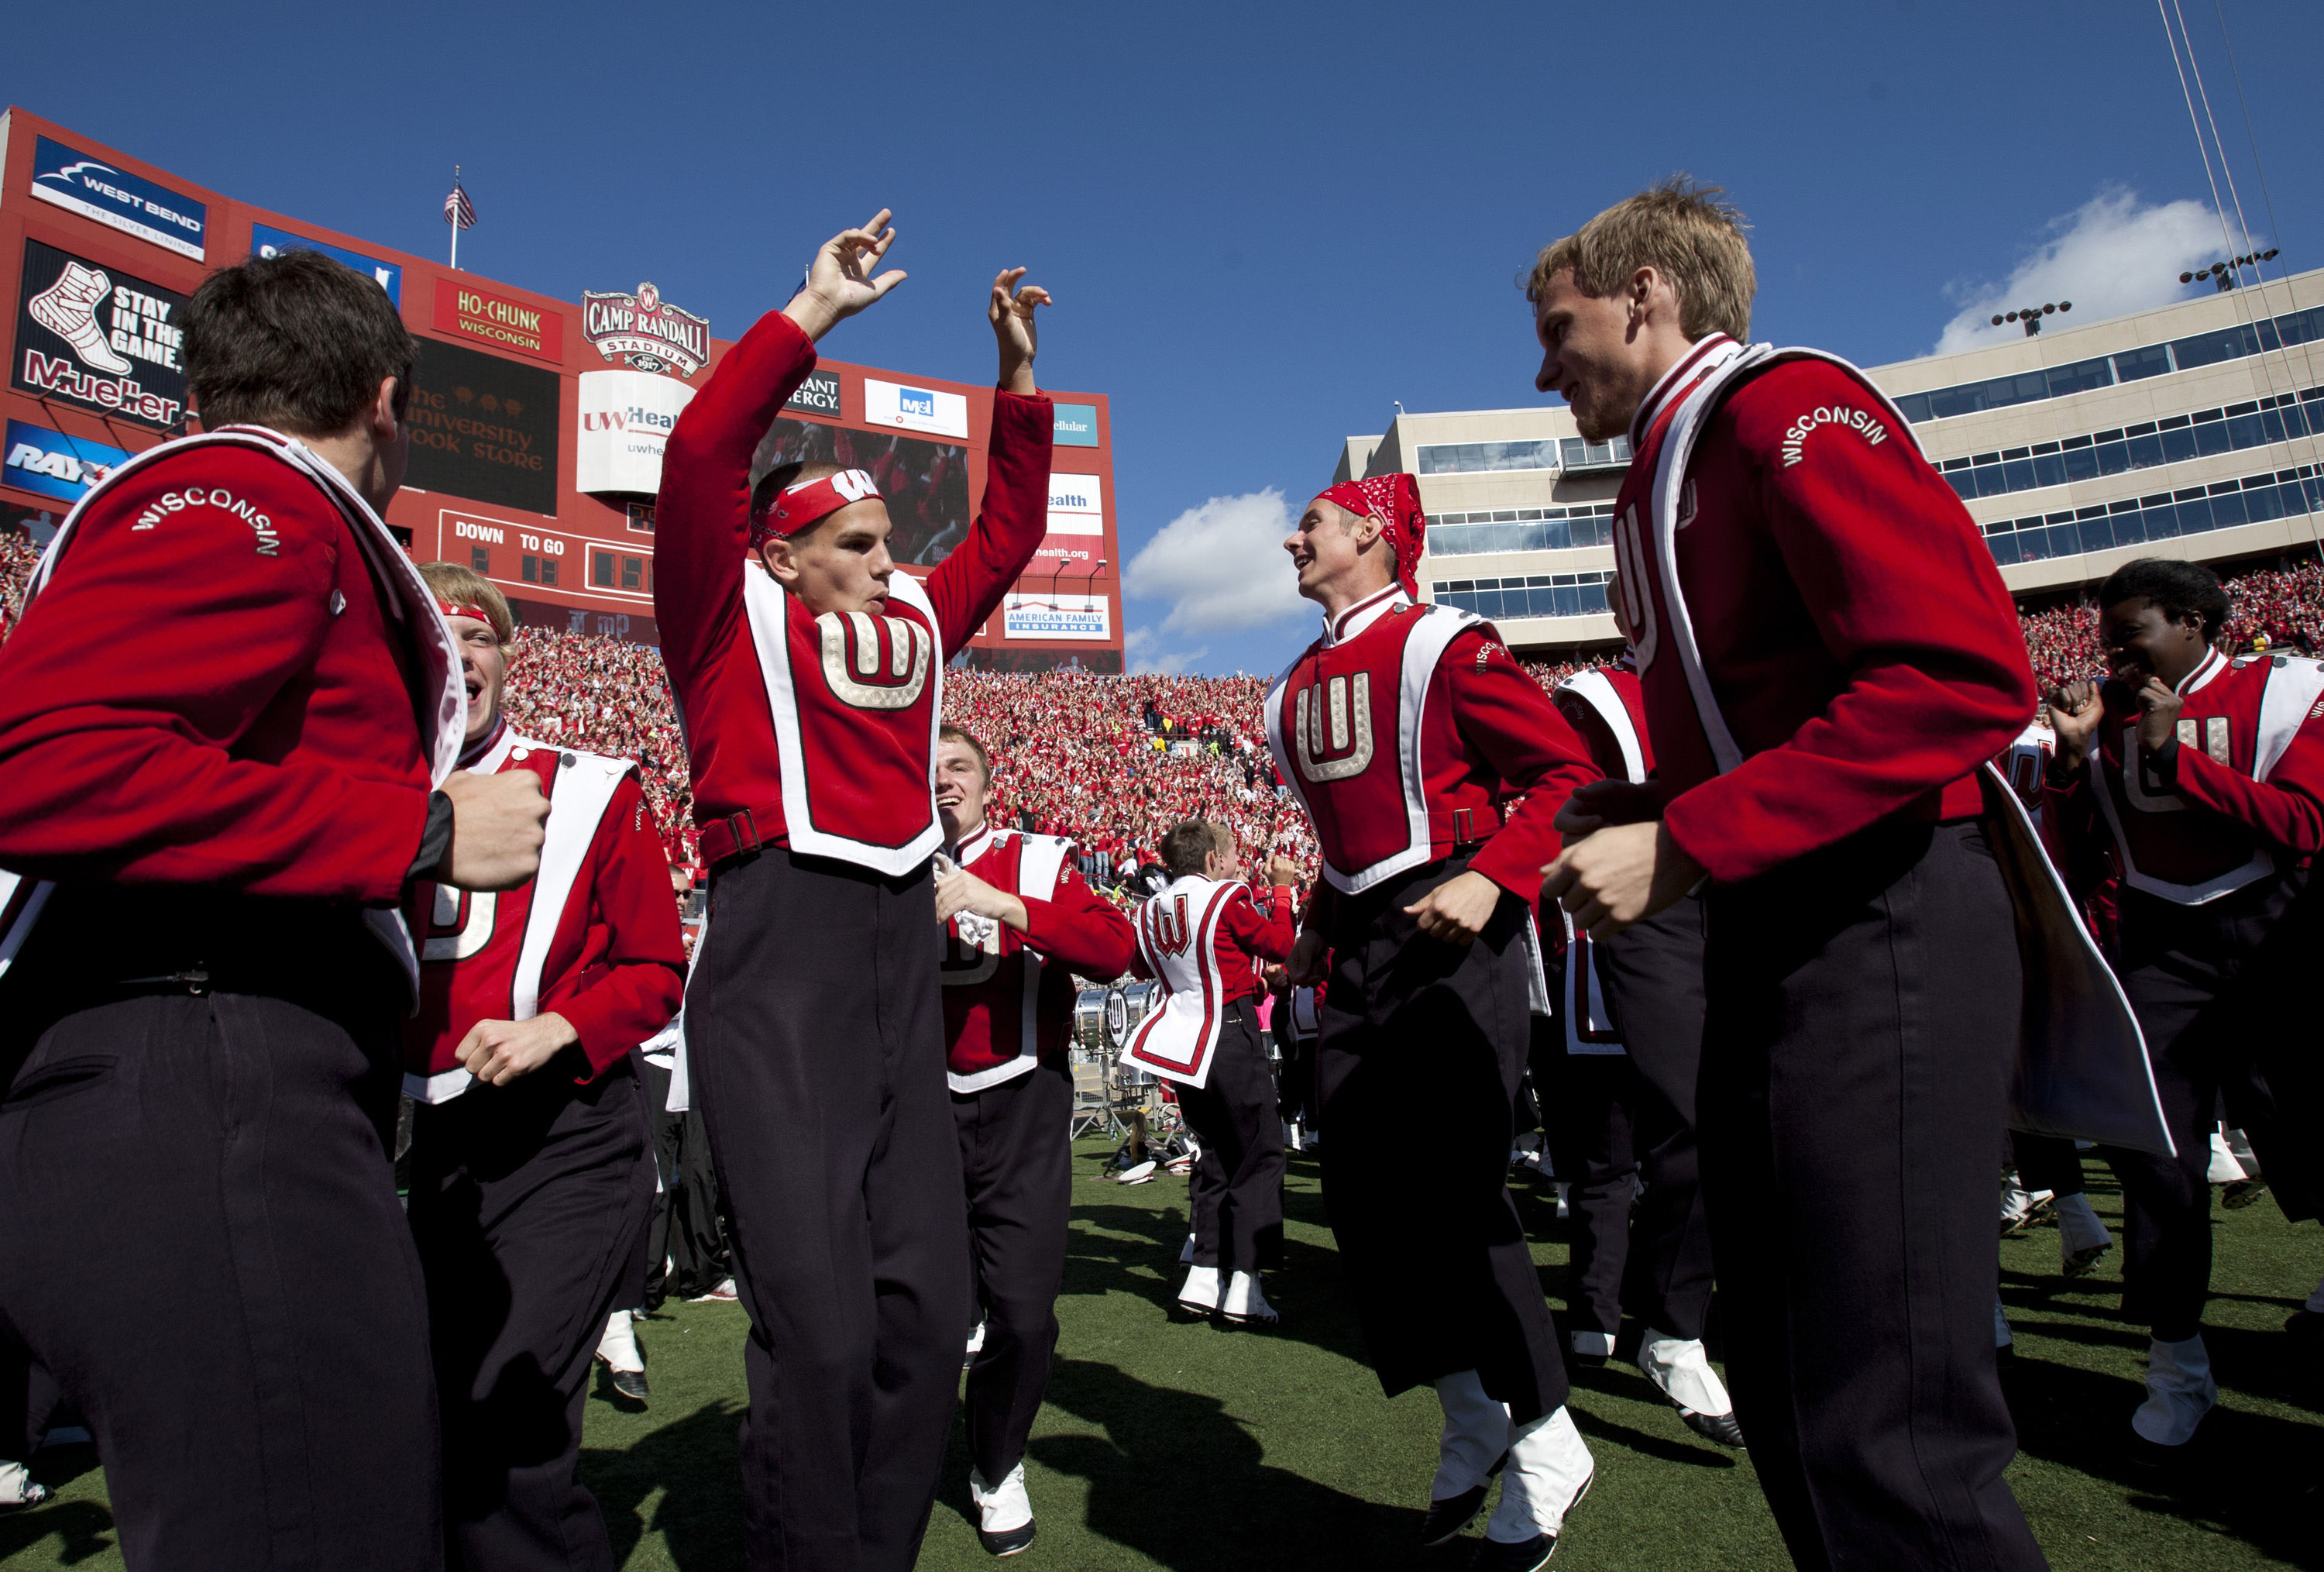 Wisconsin Band